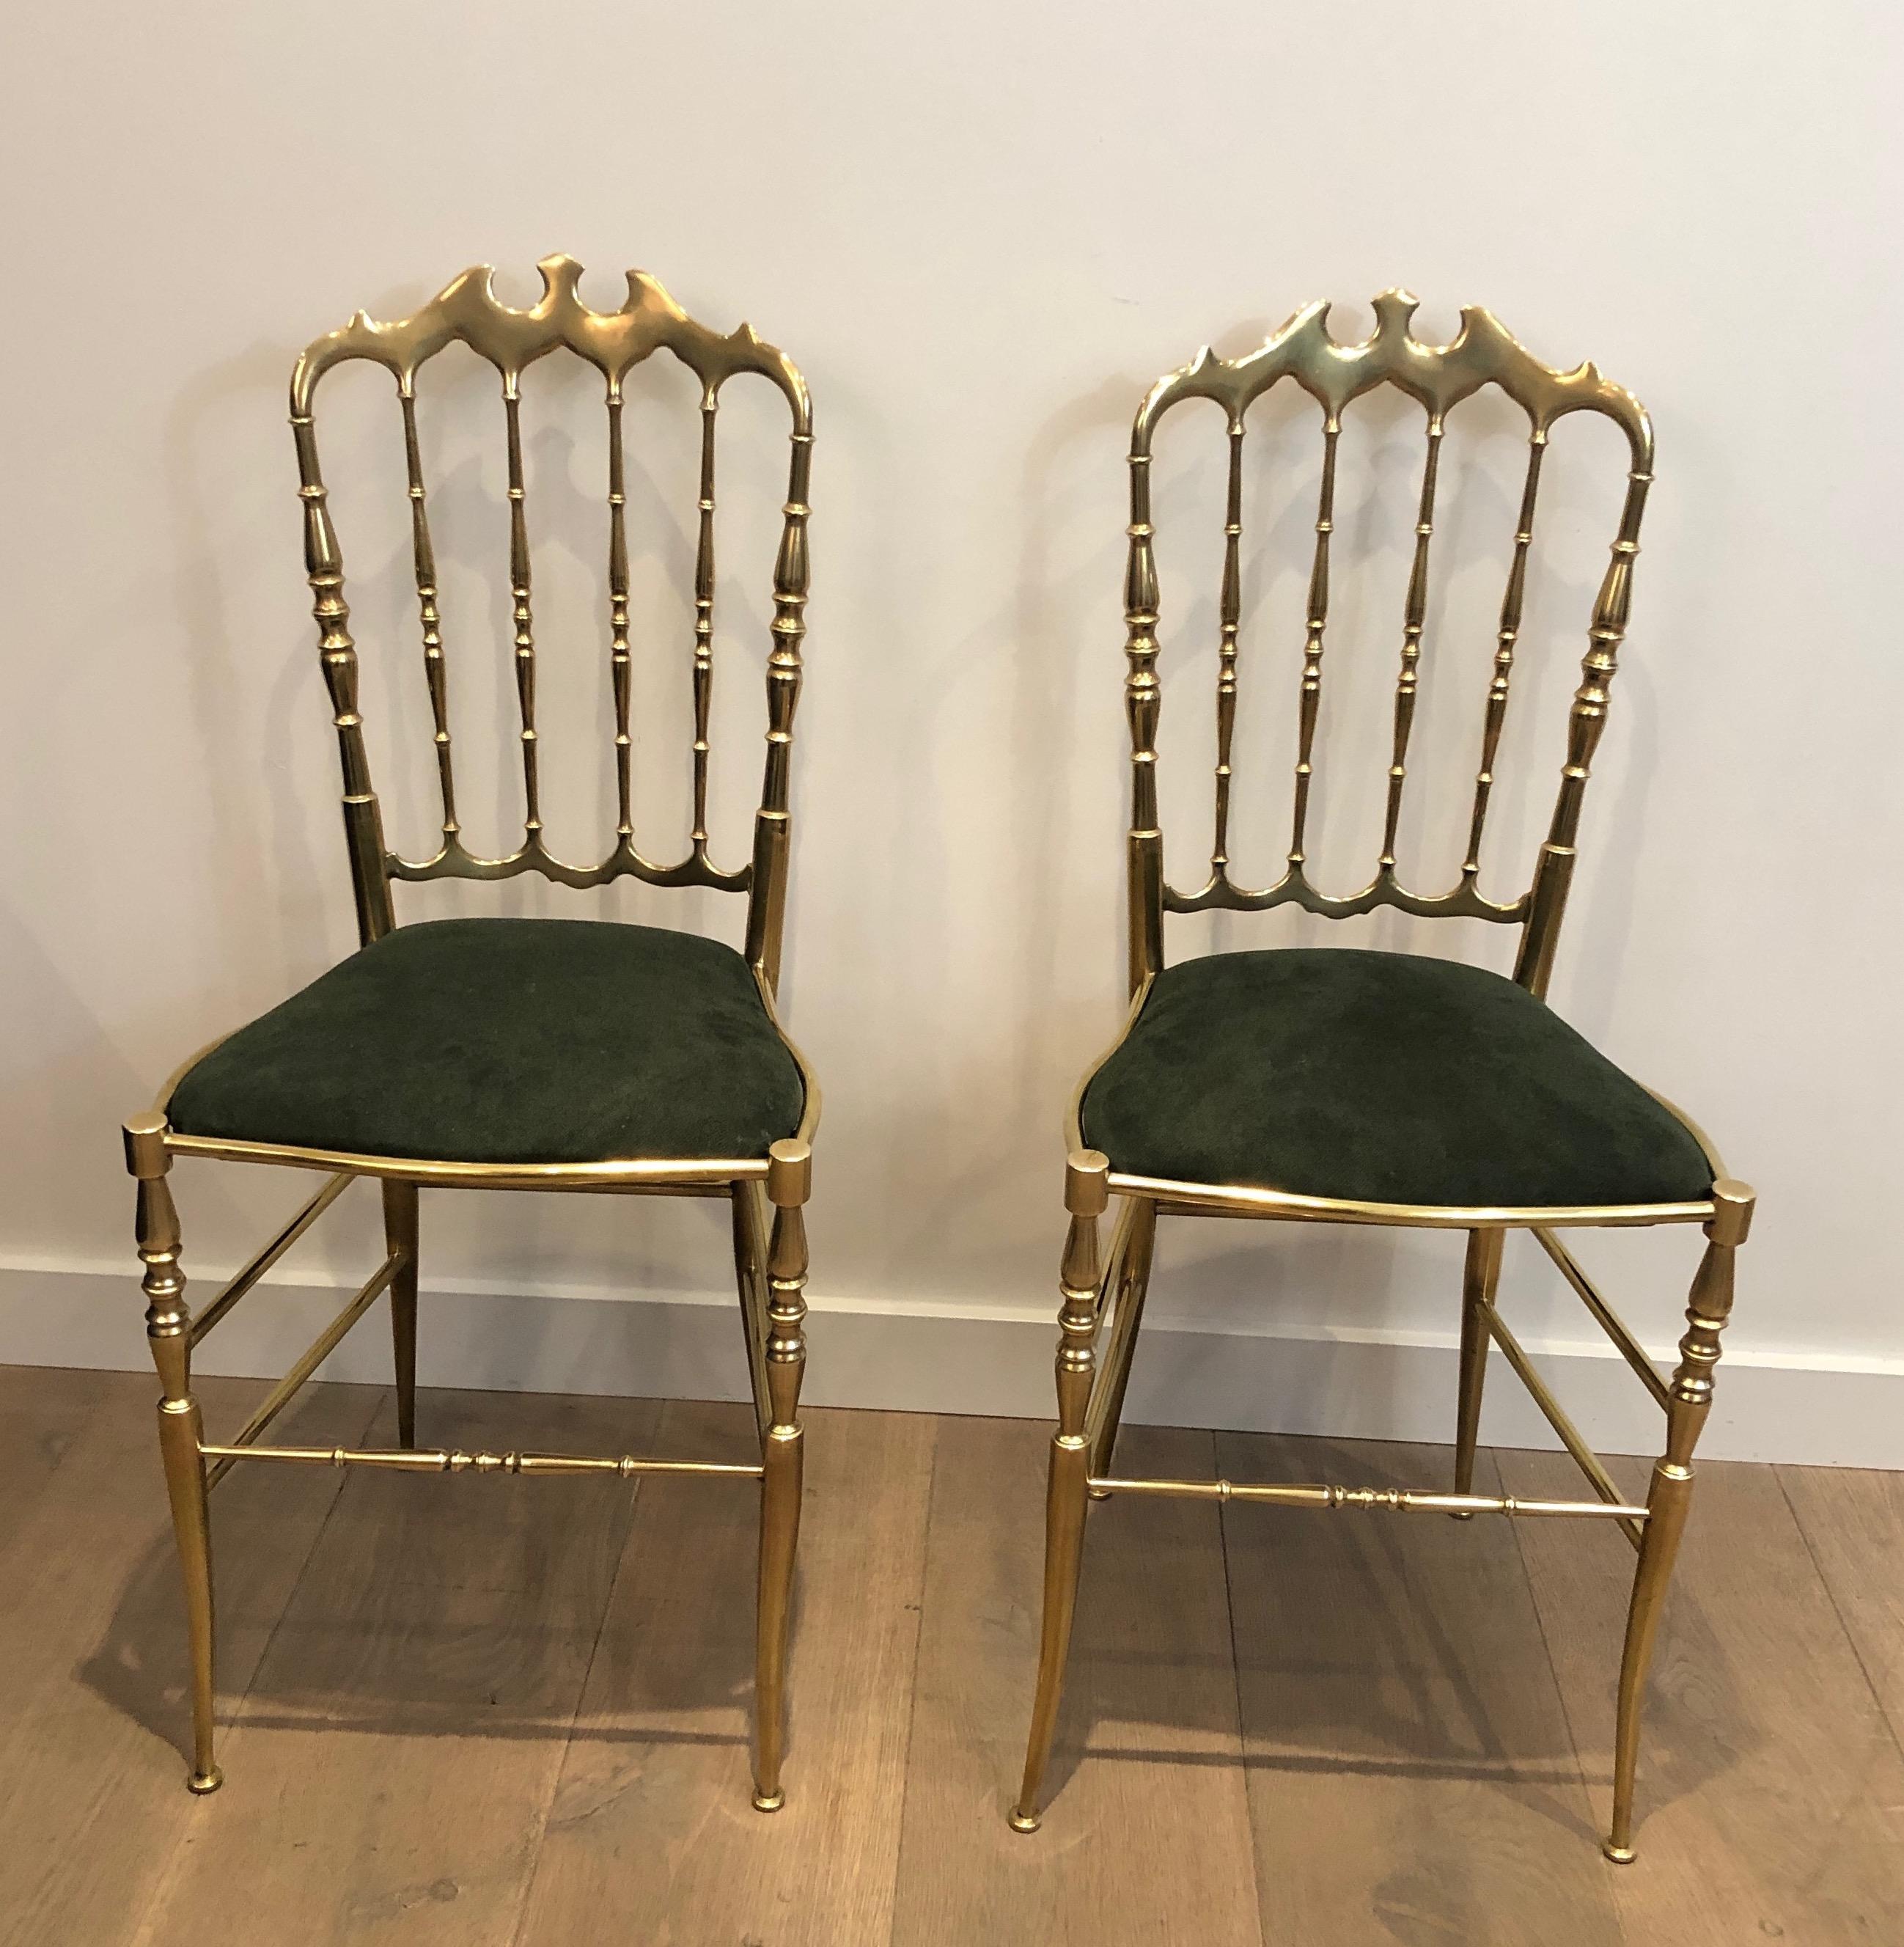 Mid-20th Century Rare Suite of 6 Beautifully Crafted Brass Chiavari Chairs, Seats Green Covered